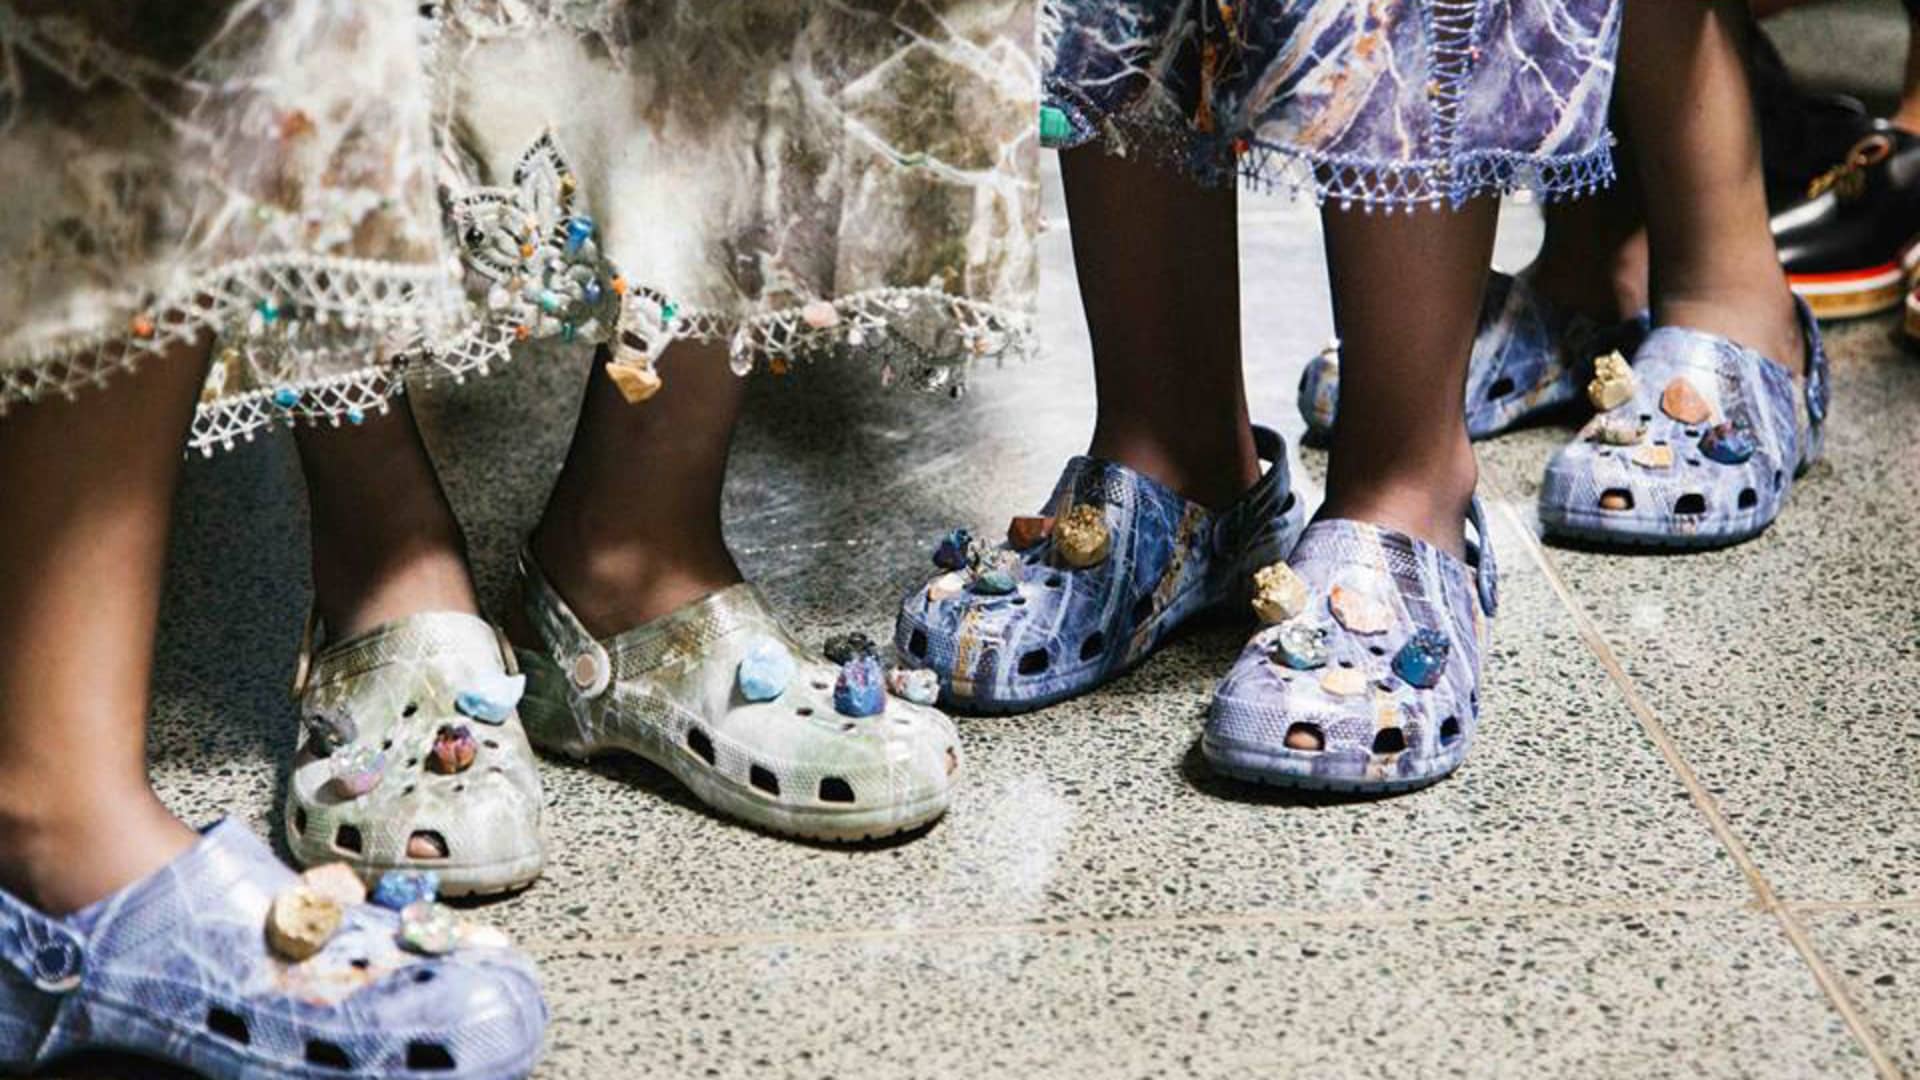 Ugly shoes are en vogue, as Ugg mashup hits stores, Crocs storm